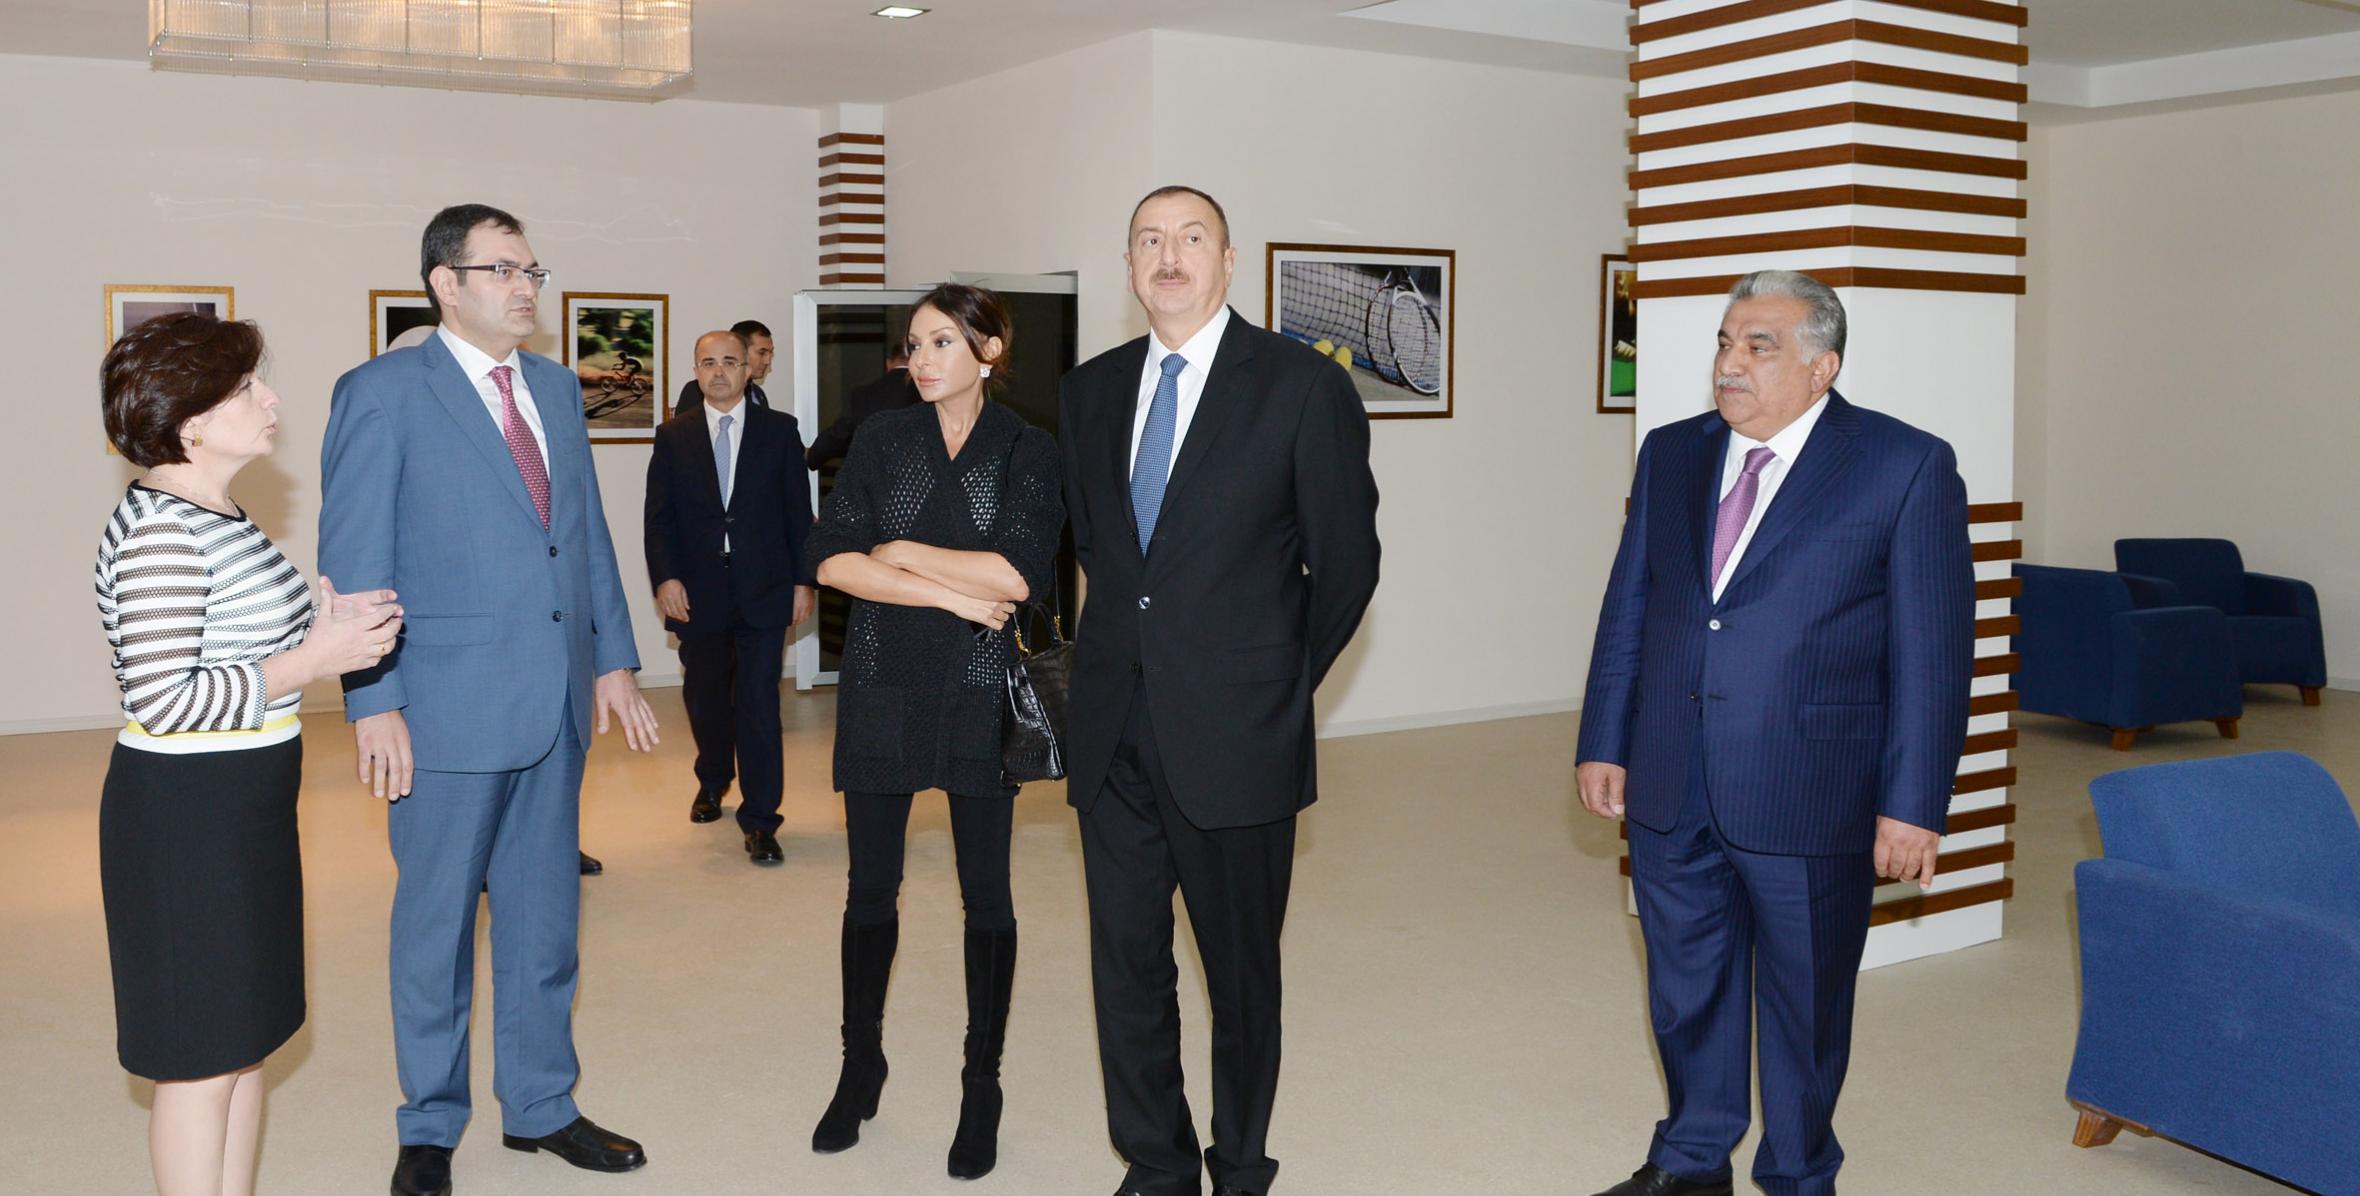 Ilham Aliyev attended the opening of a Youth Training and Recreation Center in Dashkasan